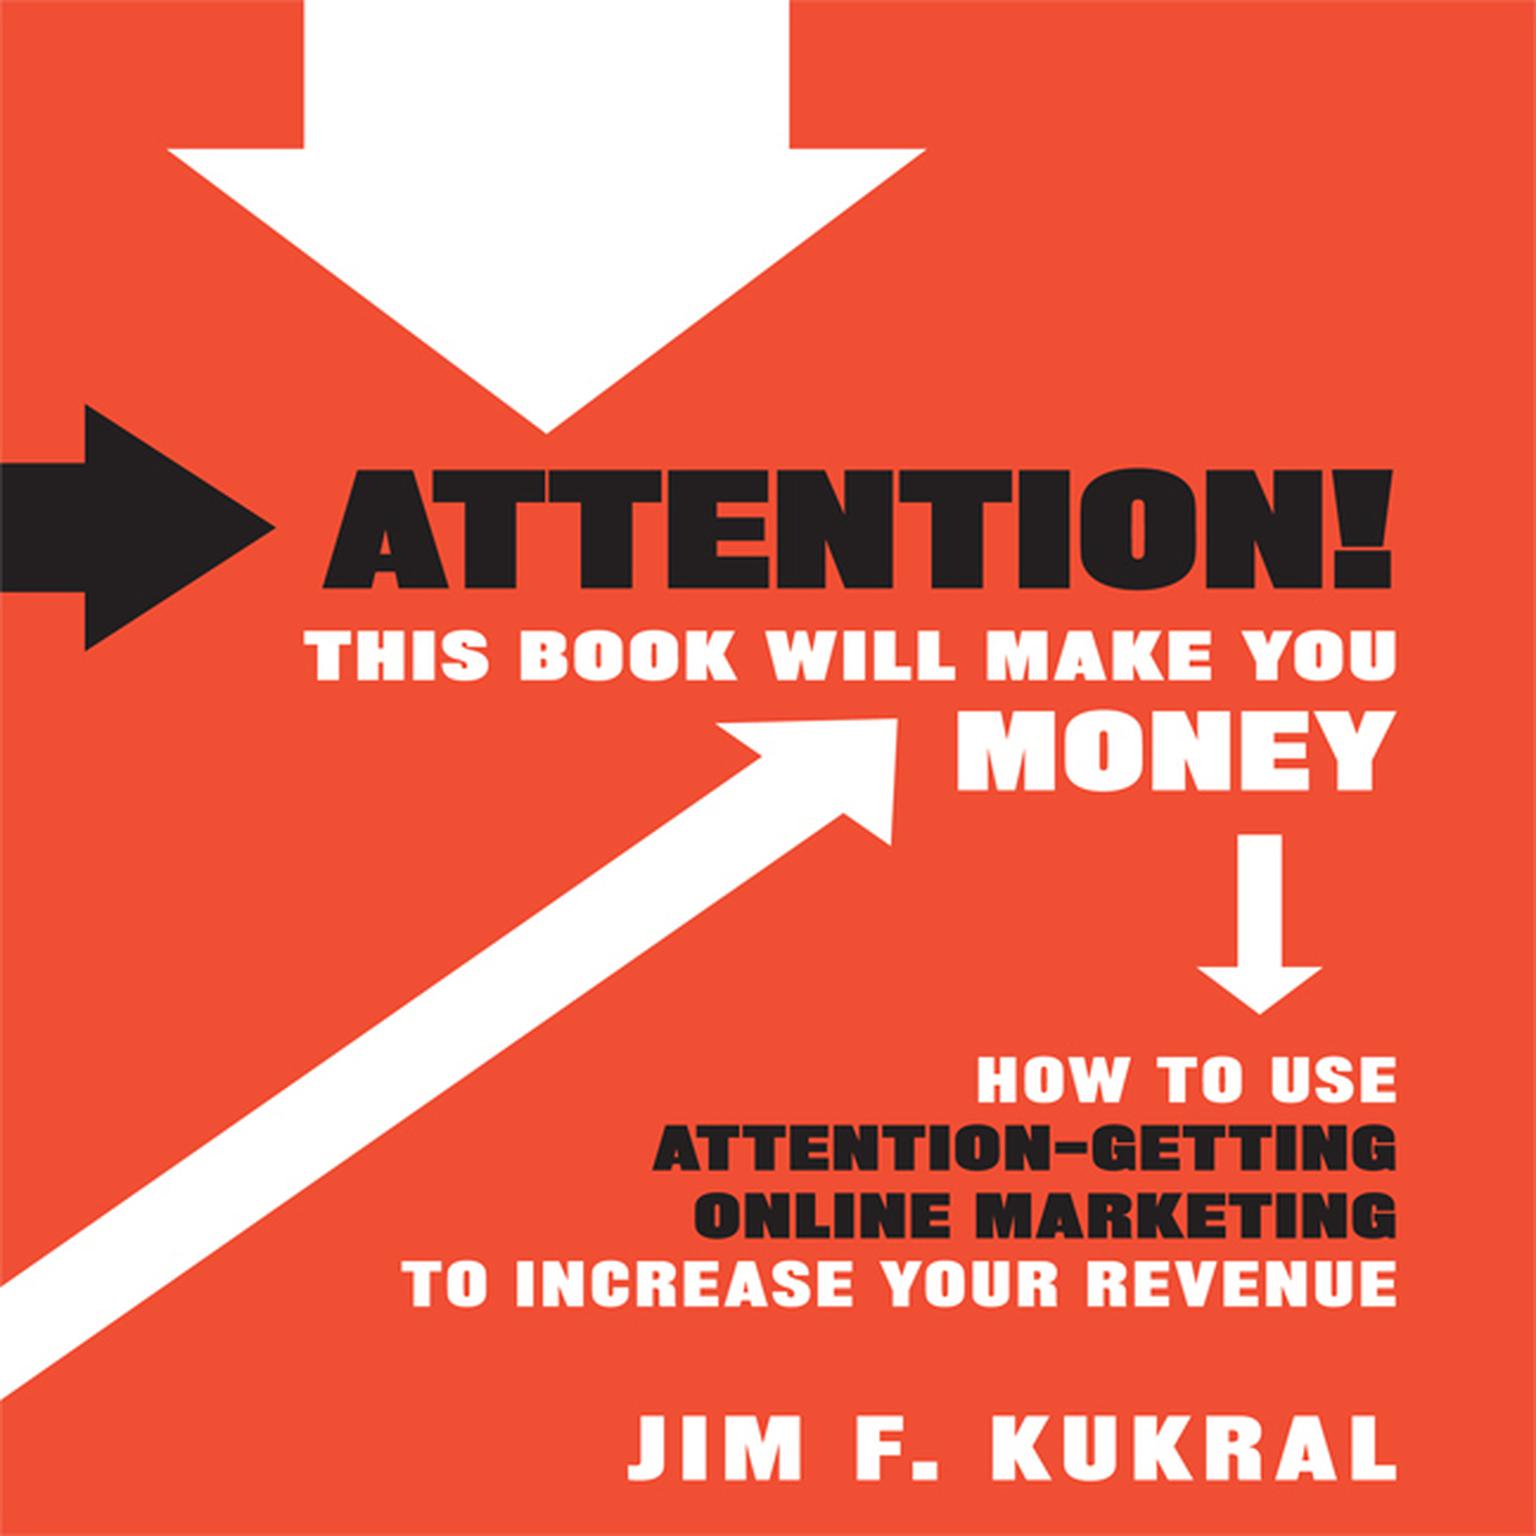 Attention! This Book Will Make You Money: How to Use Attention-Getting Online Marketing to Increase Your Revenue Audiobook, by Jim F. Kukral